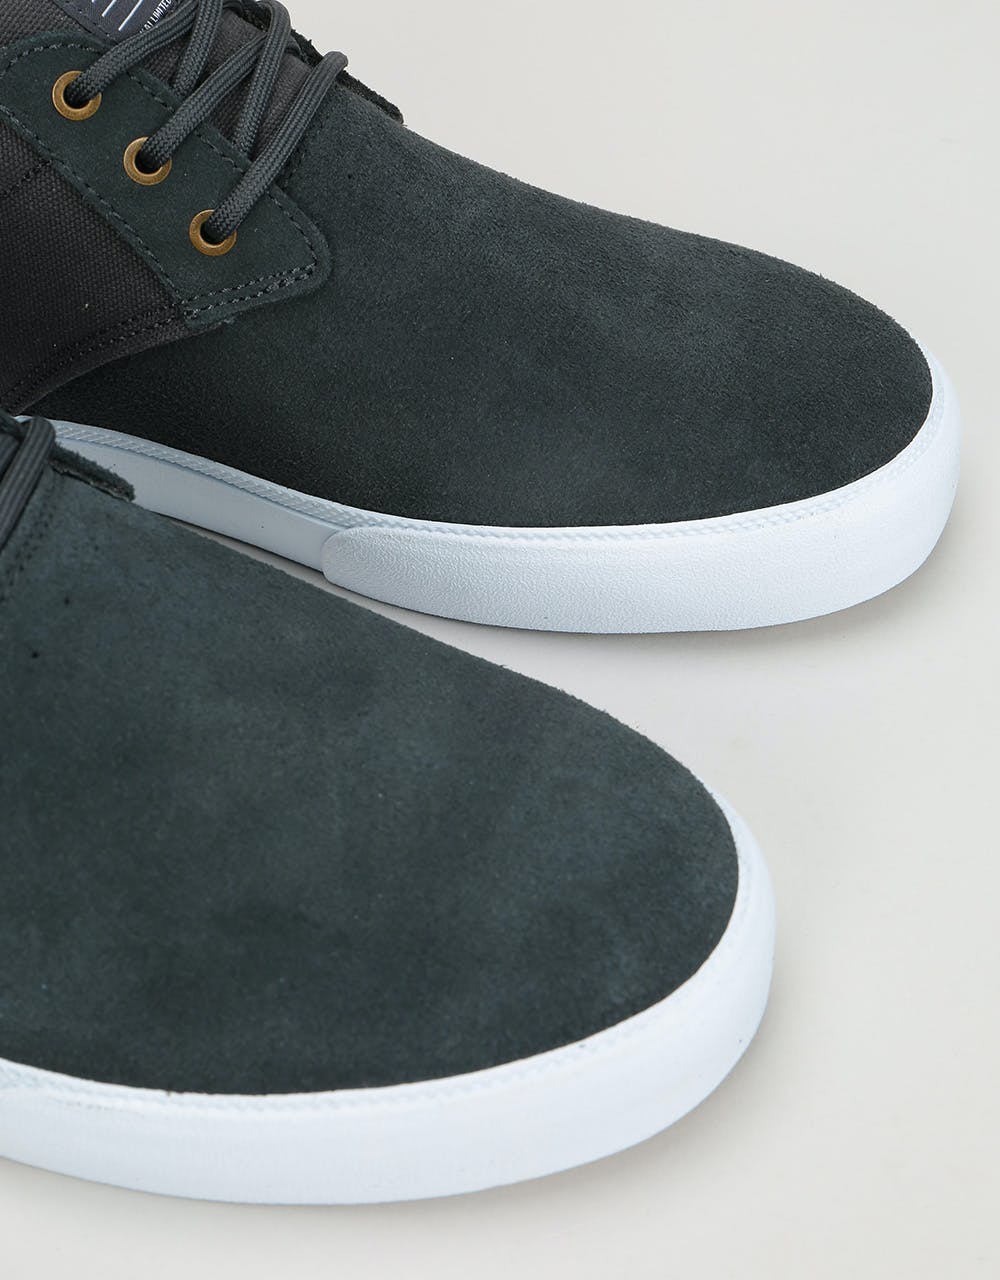 Lakai Daly Skate Shoes - Charcoal Suede